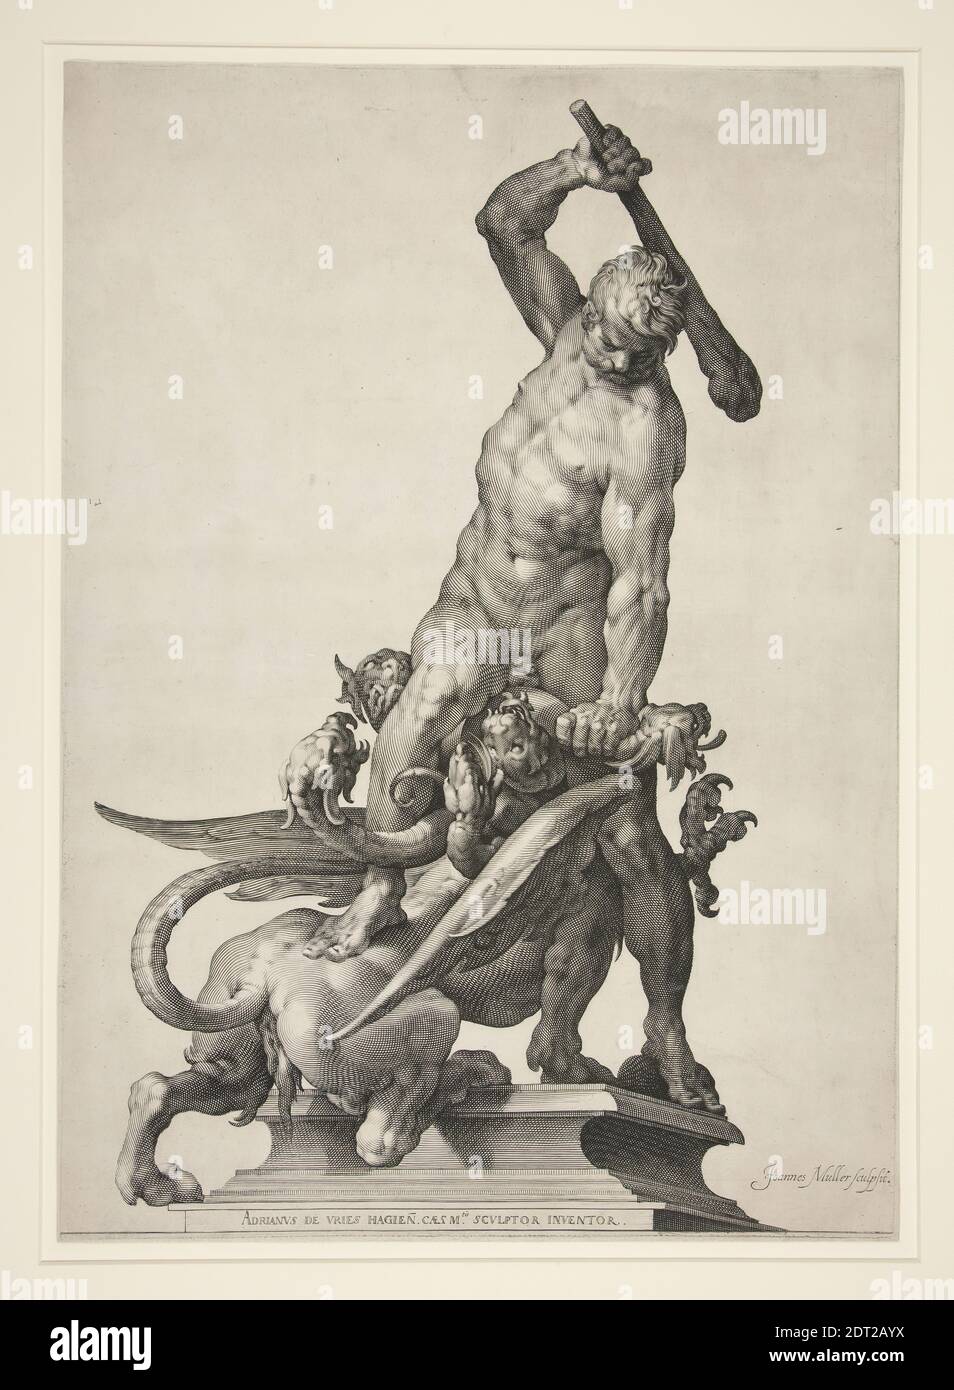 Engraver: Jan Harmensz. Muller, Dutch, 1571–1628, After: Adriaen de Vries, Dutch, 1545–1626, Hercules Killing the Hydra, ca. 1602, Engraving, sheet: 51.5 × 36.8 cm (20 1/4 × 14 1/2 in.), Made in The Netherlands, Dutch, 17th century, Works on Paper - Prints Stock Photo